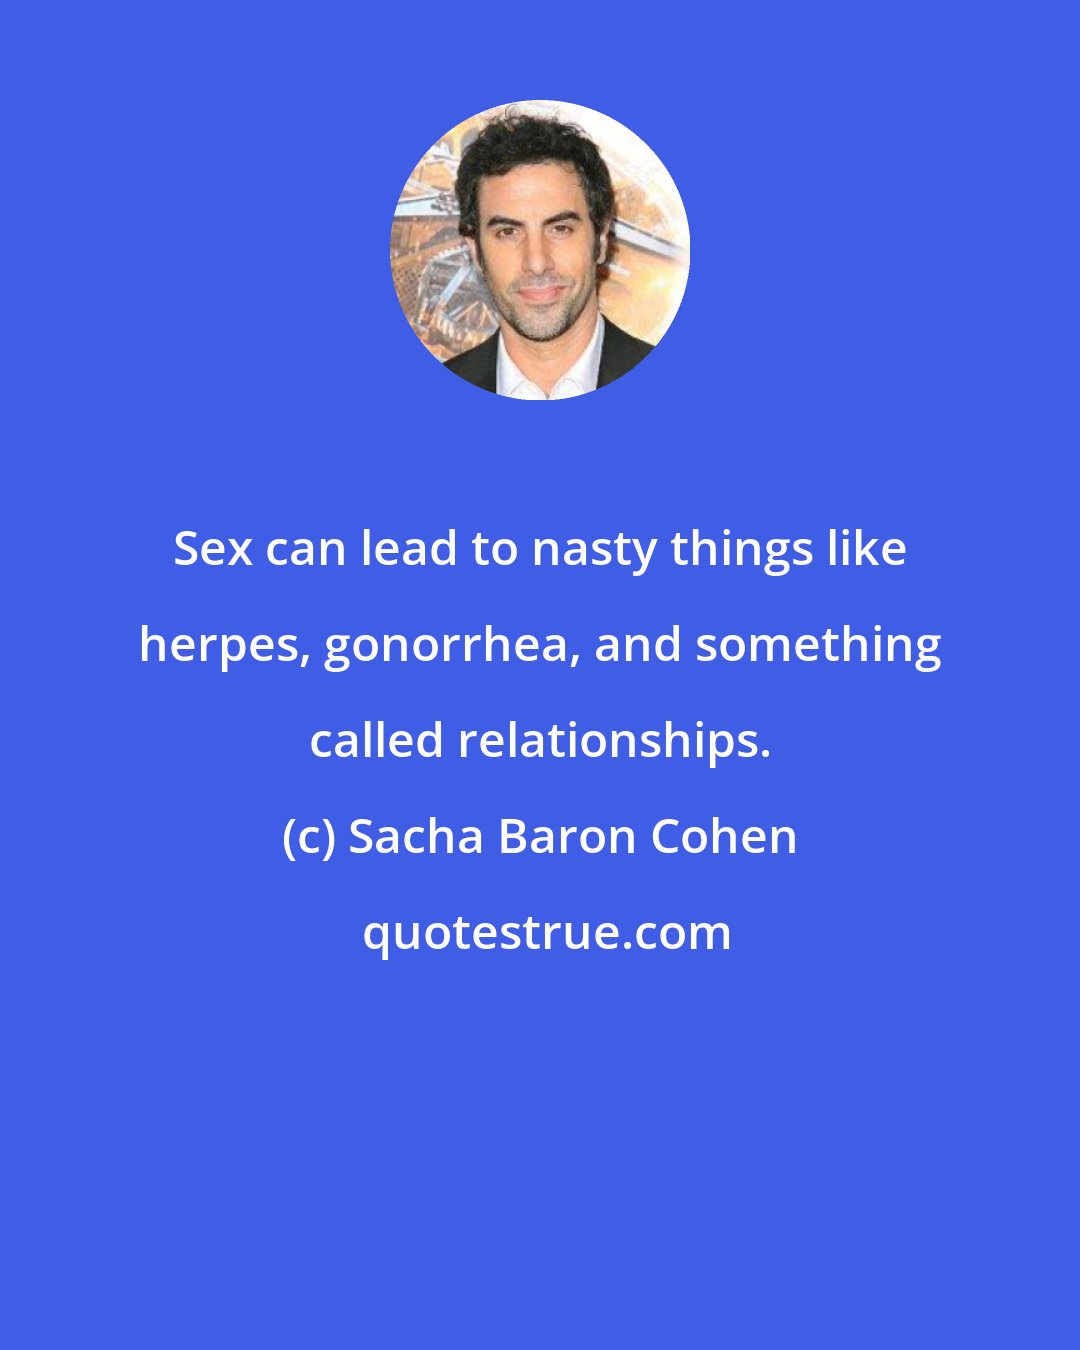 Sacha Baron Cohen: Sex can lead to nasty things like herpes, gonorrhea, and something called relationships.